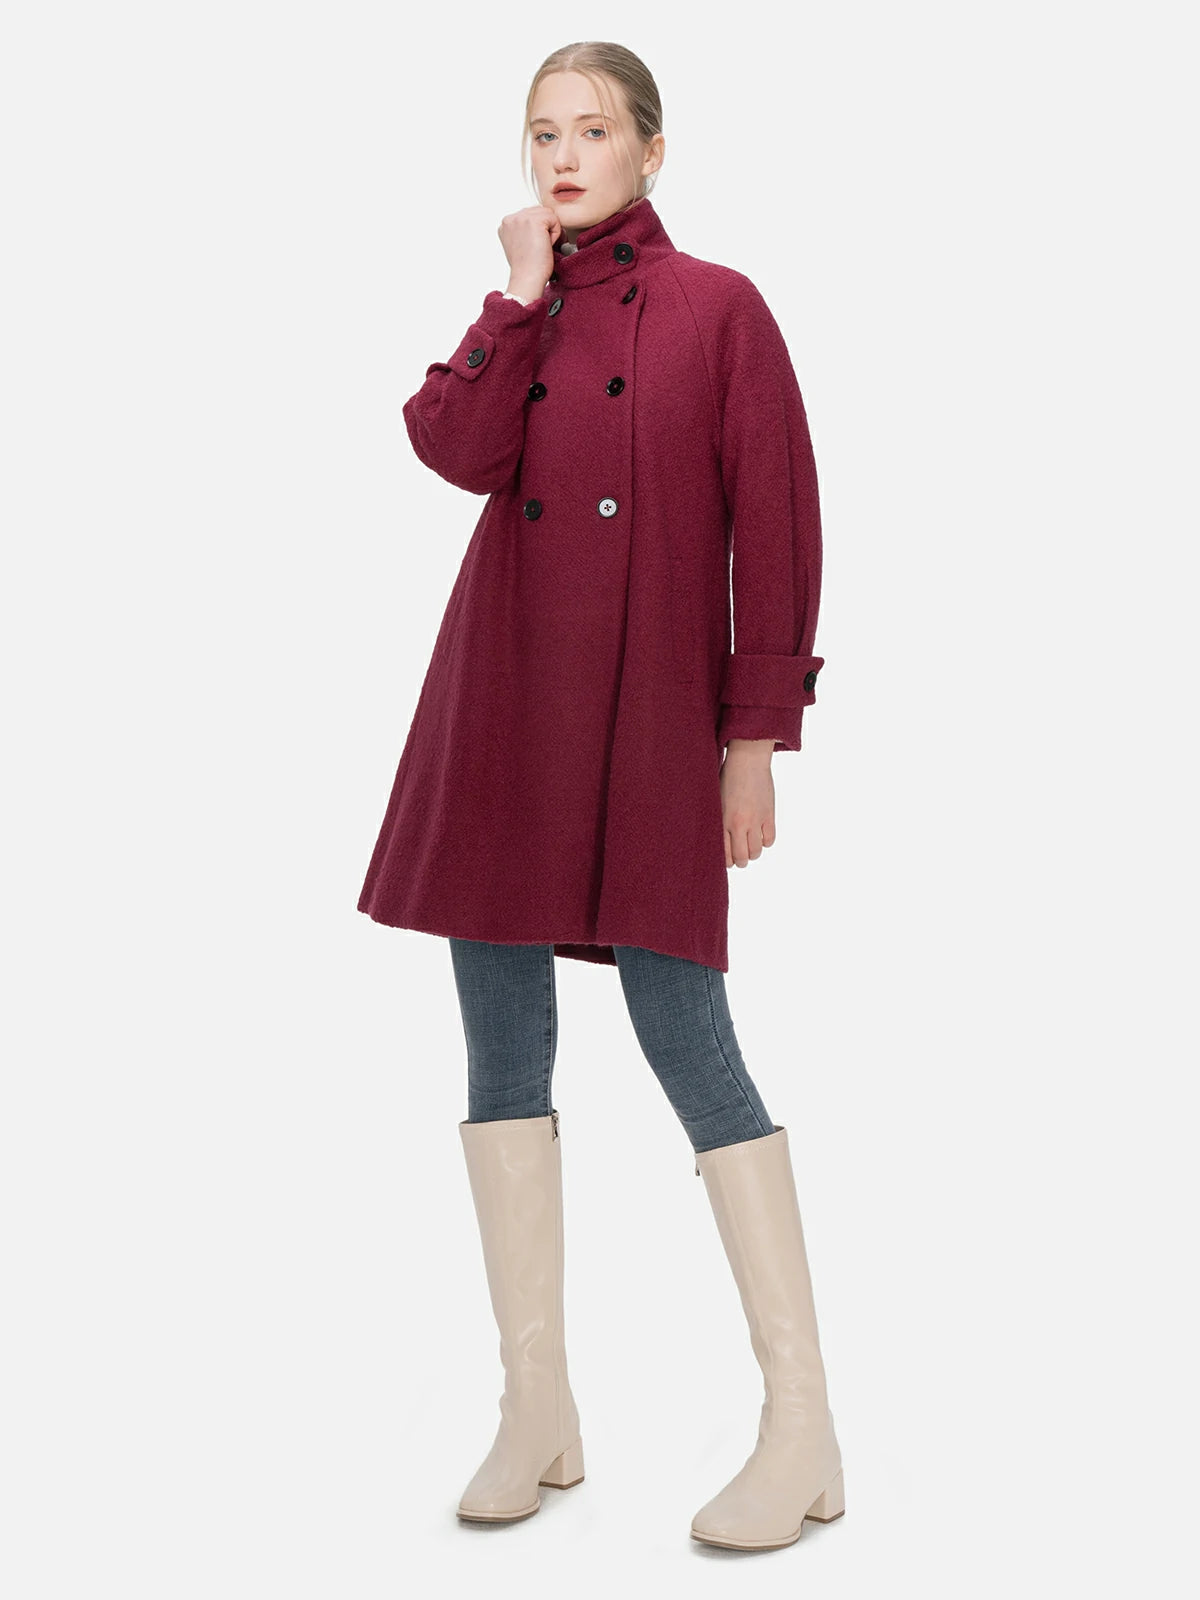 Redefine your outerwear collection with this deep magenta wool coat, showcasing both stand collar and lapel designs, a double-breasted silhouette, and an exquisite fusion of classic and modern style.